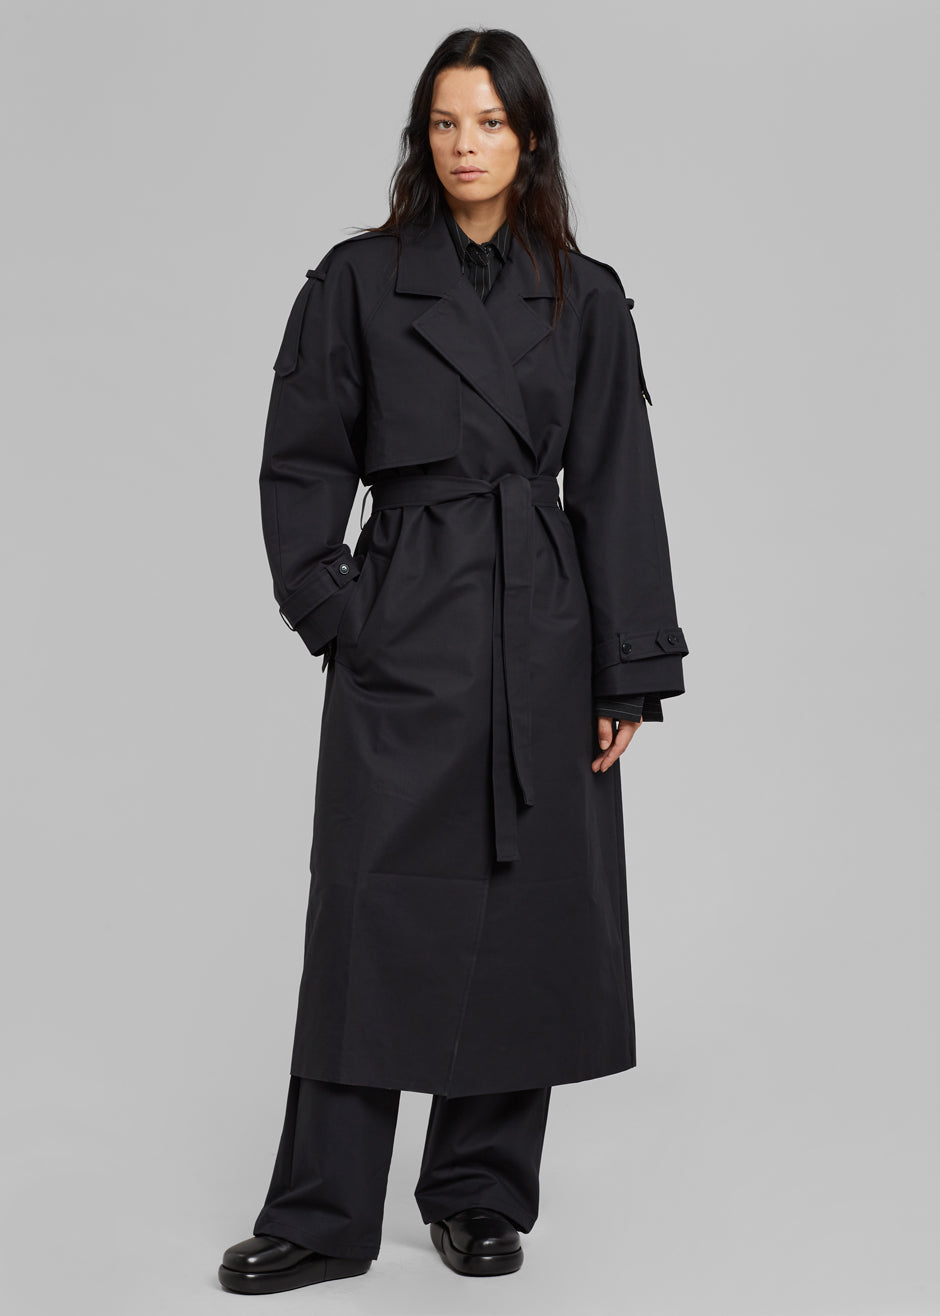 Suzanne Trench Coat - Black - 1